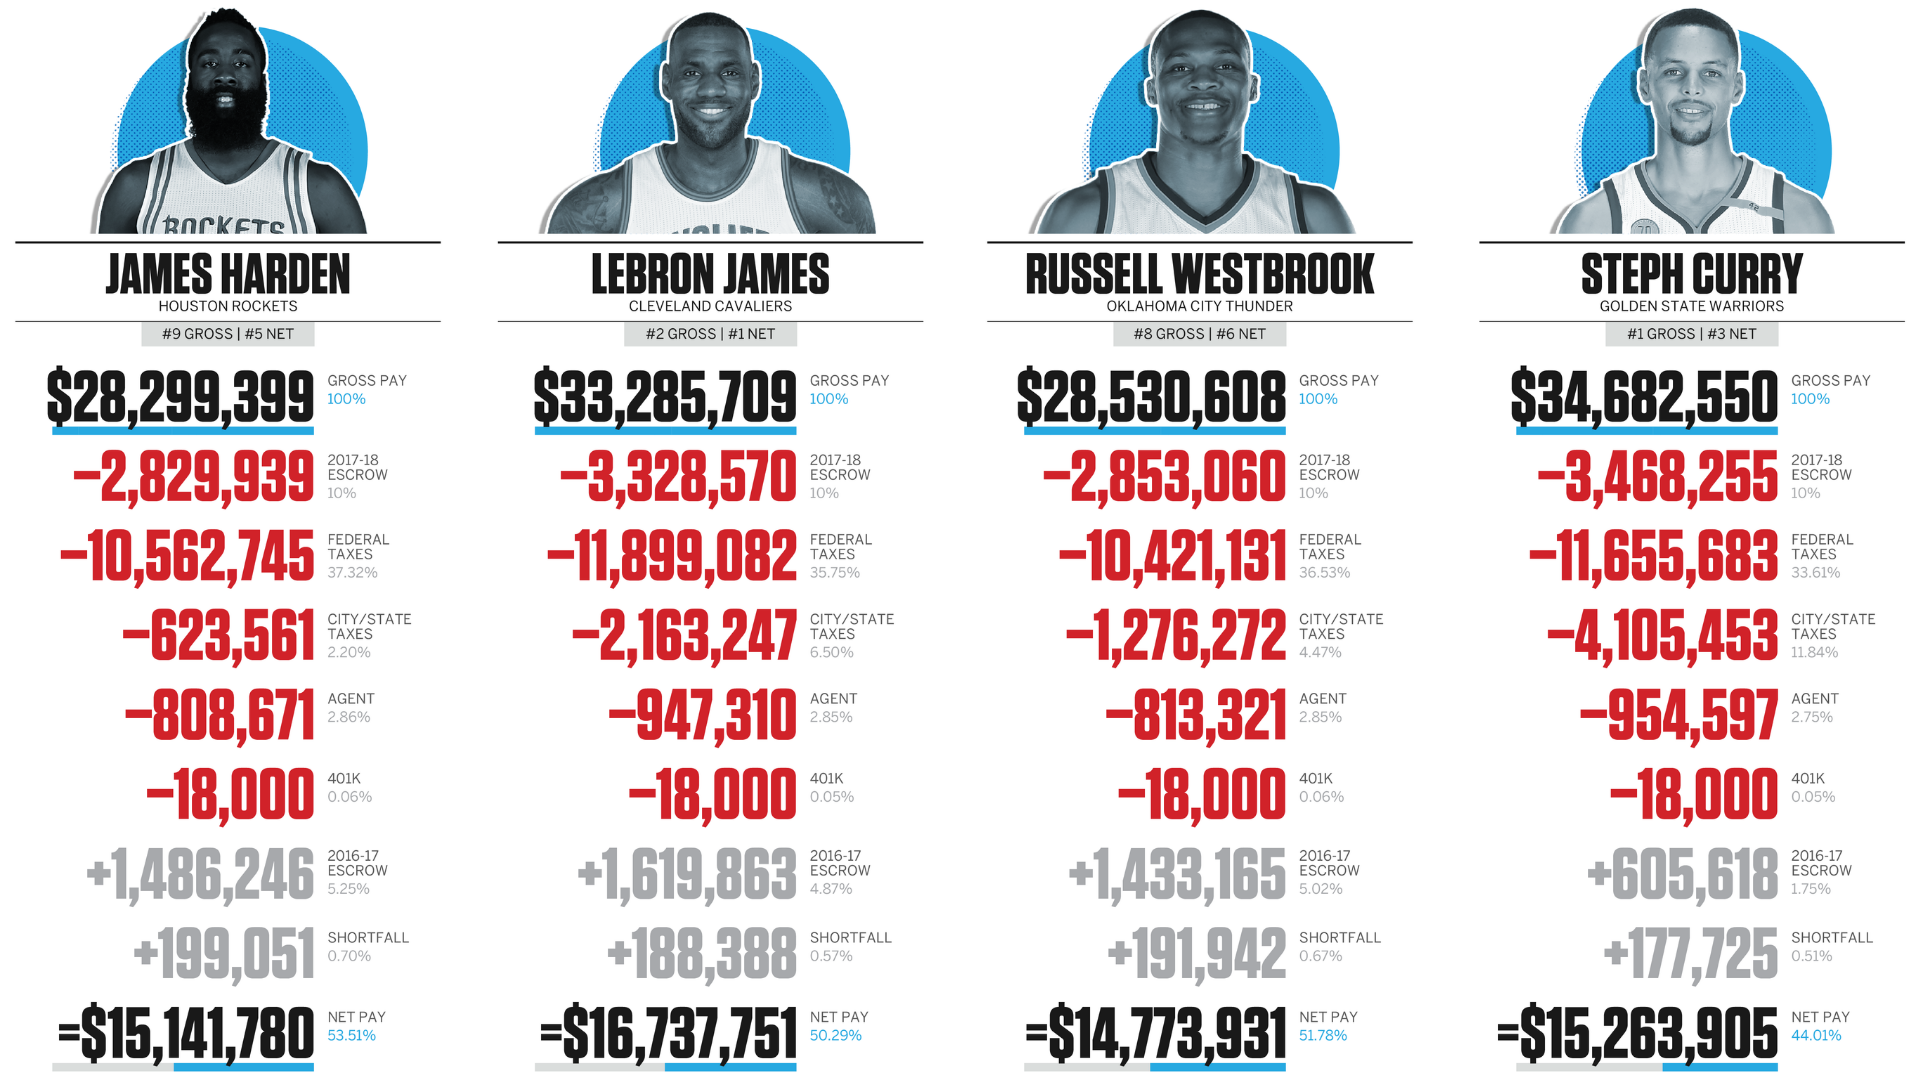 What Is The Average Salary Of A Professional Basketball Player